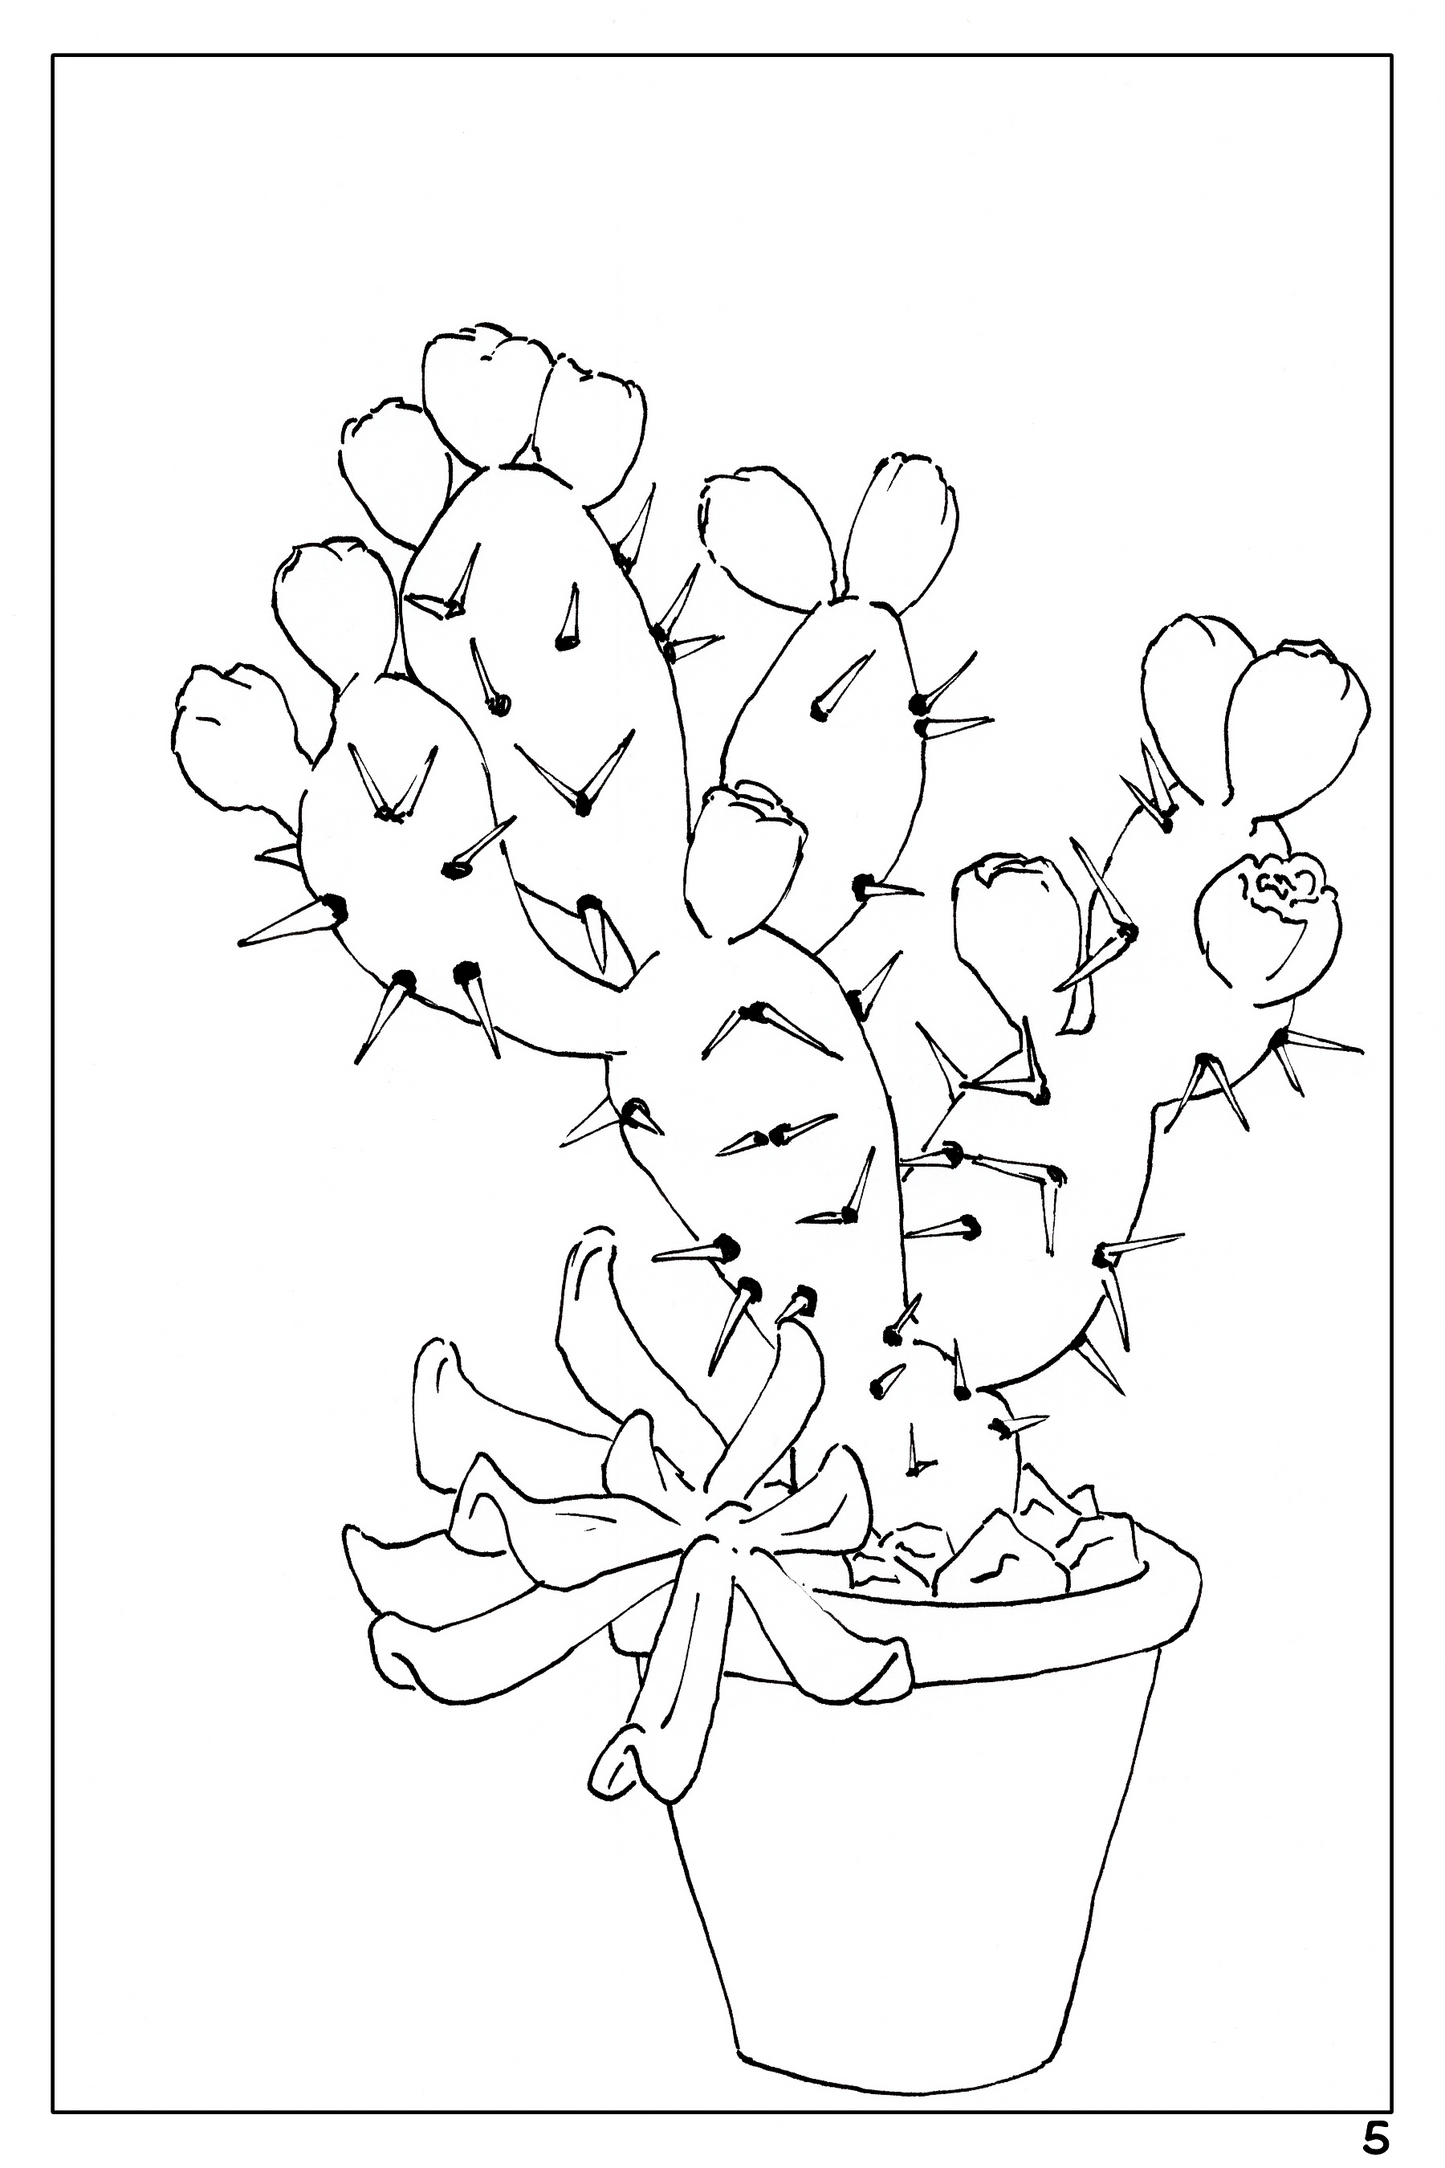 Plants and Flowers themed watercolor coloring book